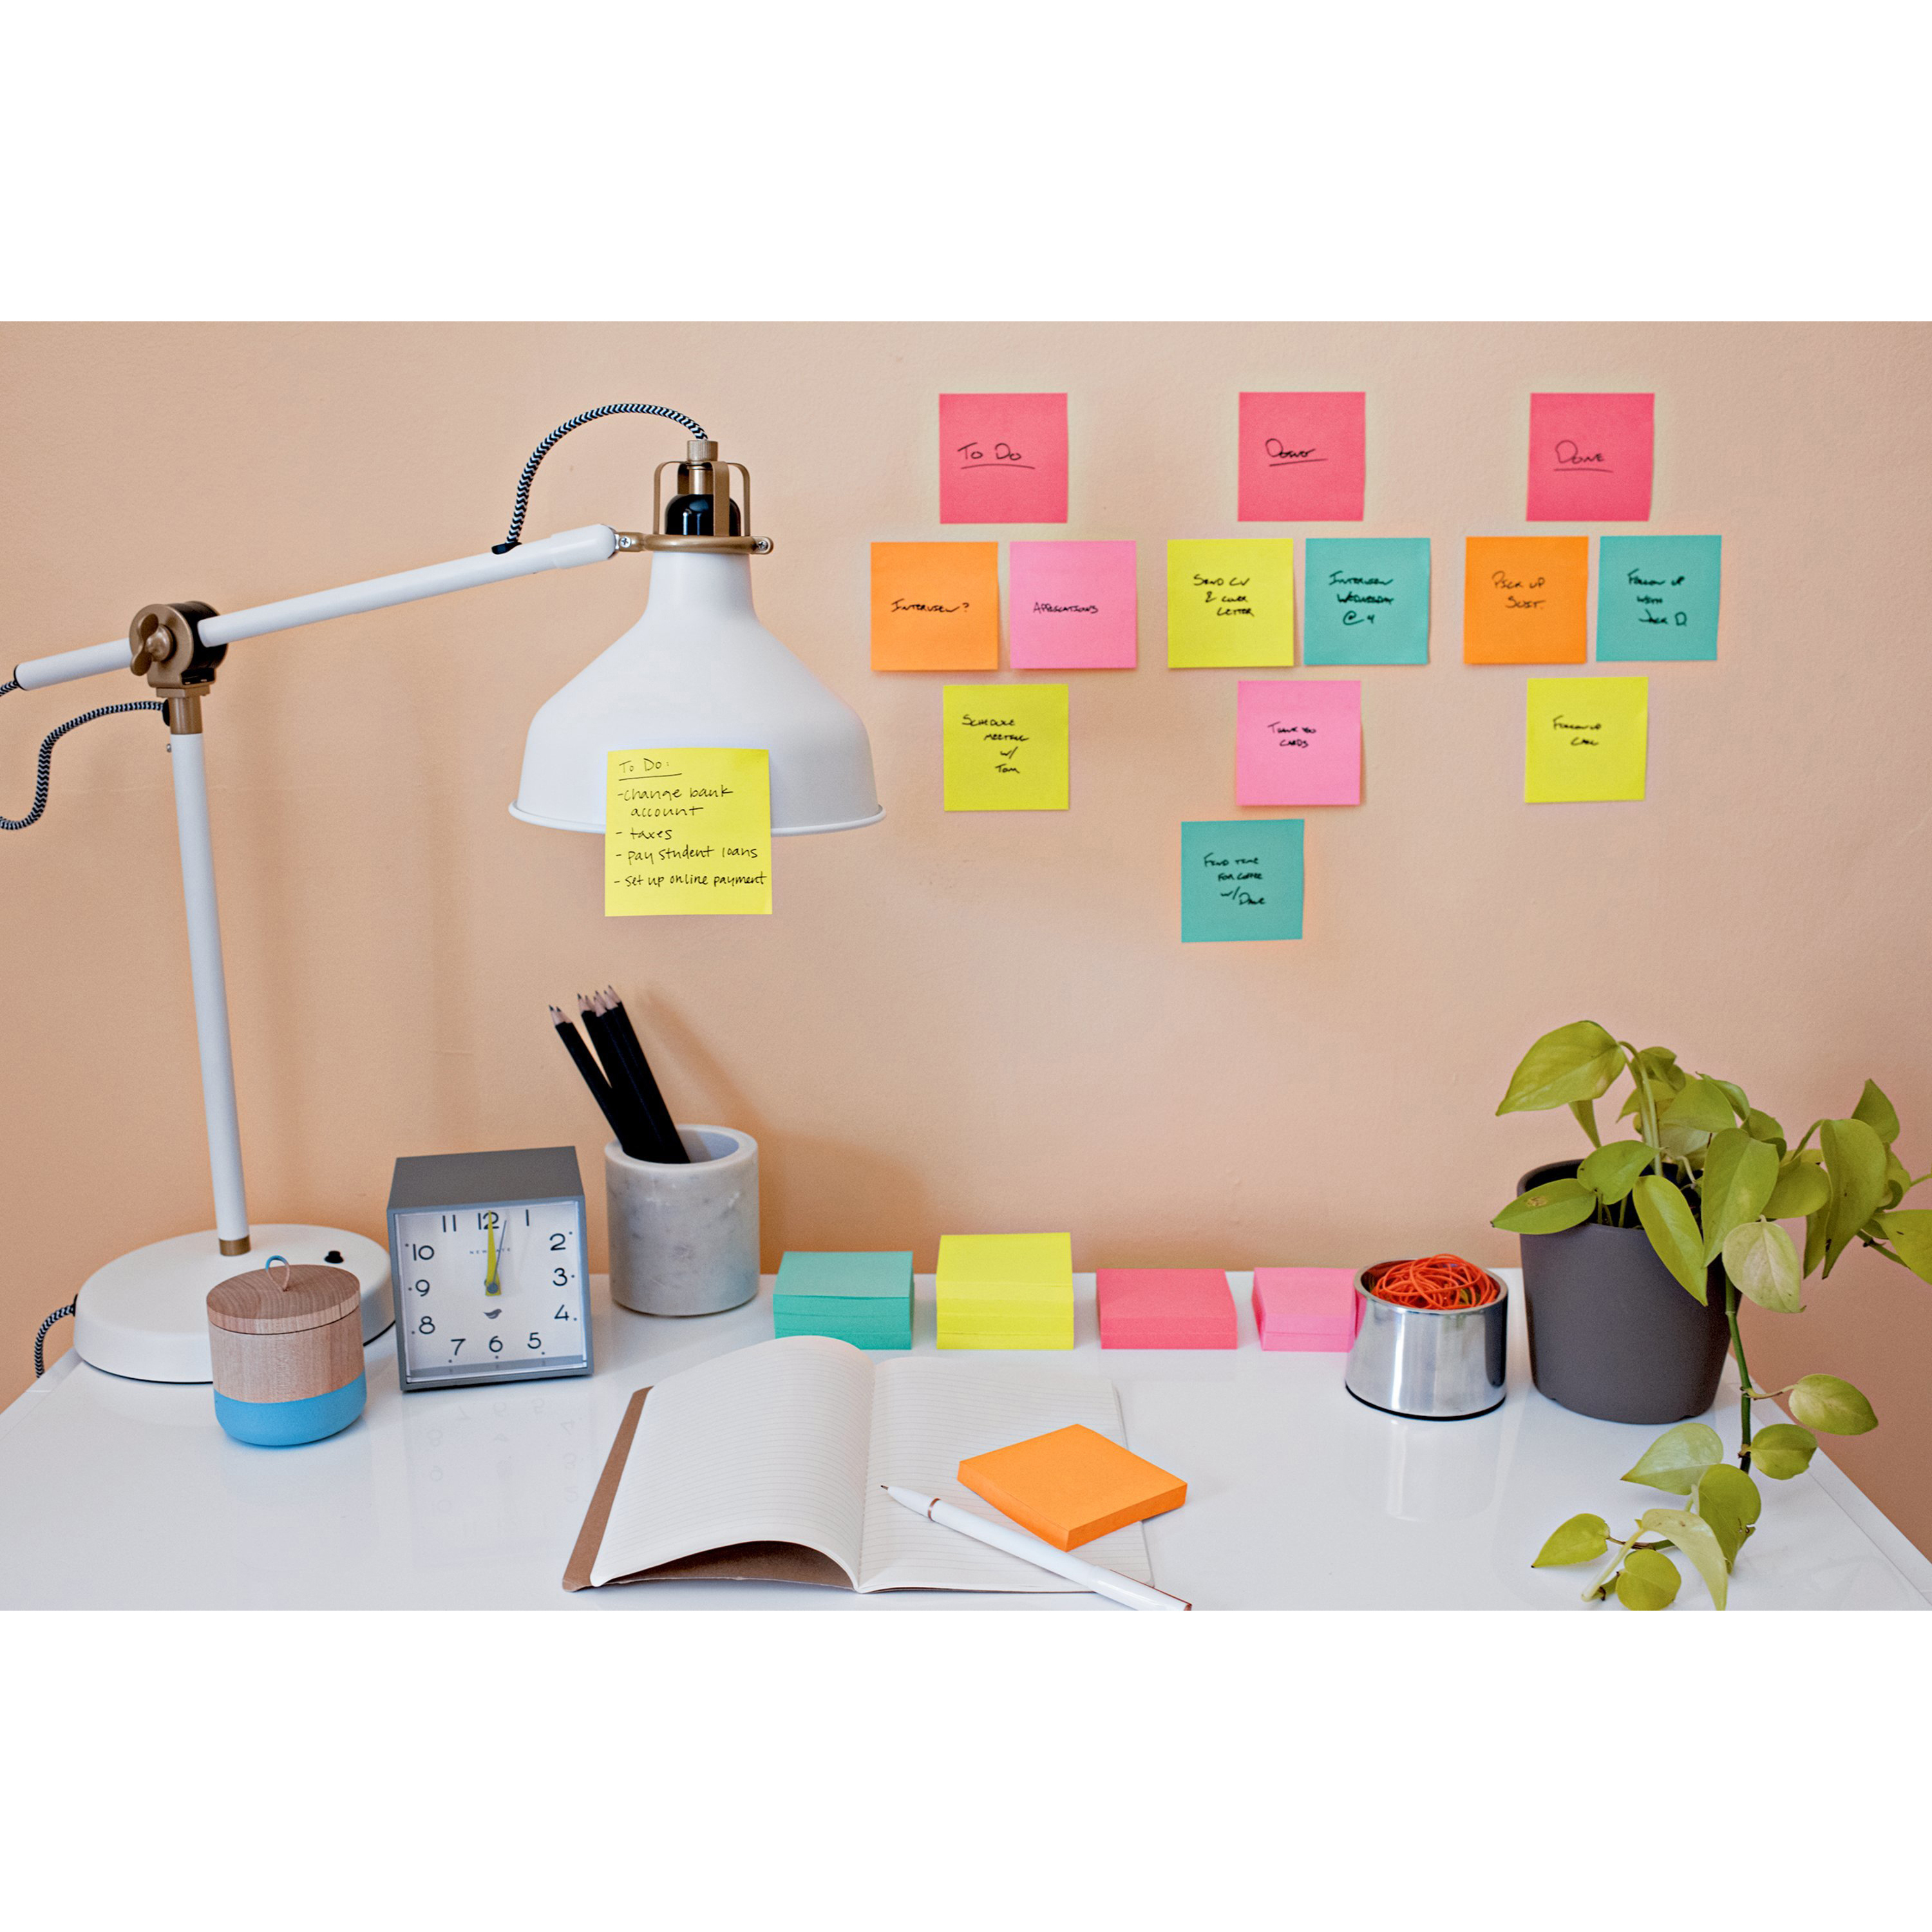 Post-It Super Sticky Notes, Jewel Pop - 12 pads, 90 sheets each